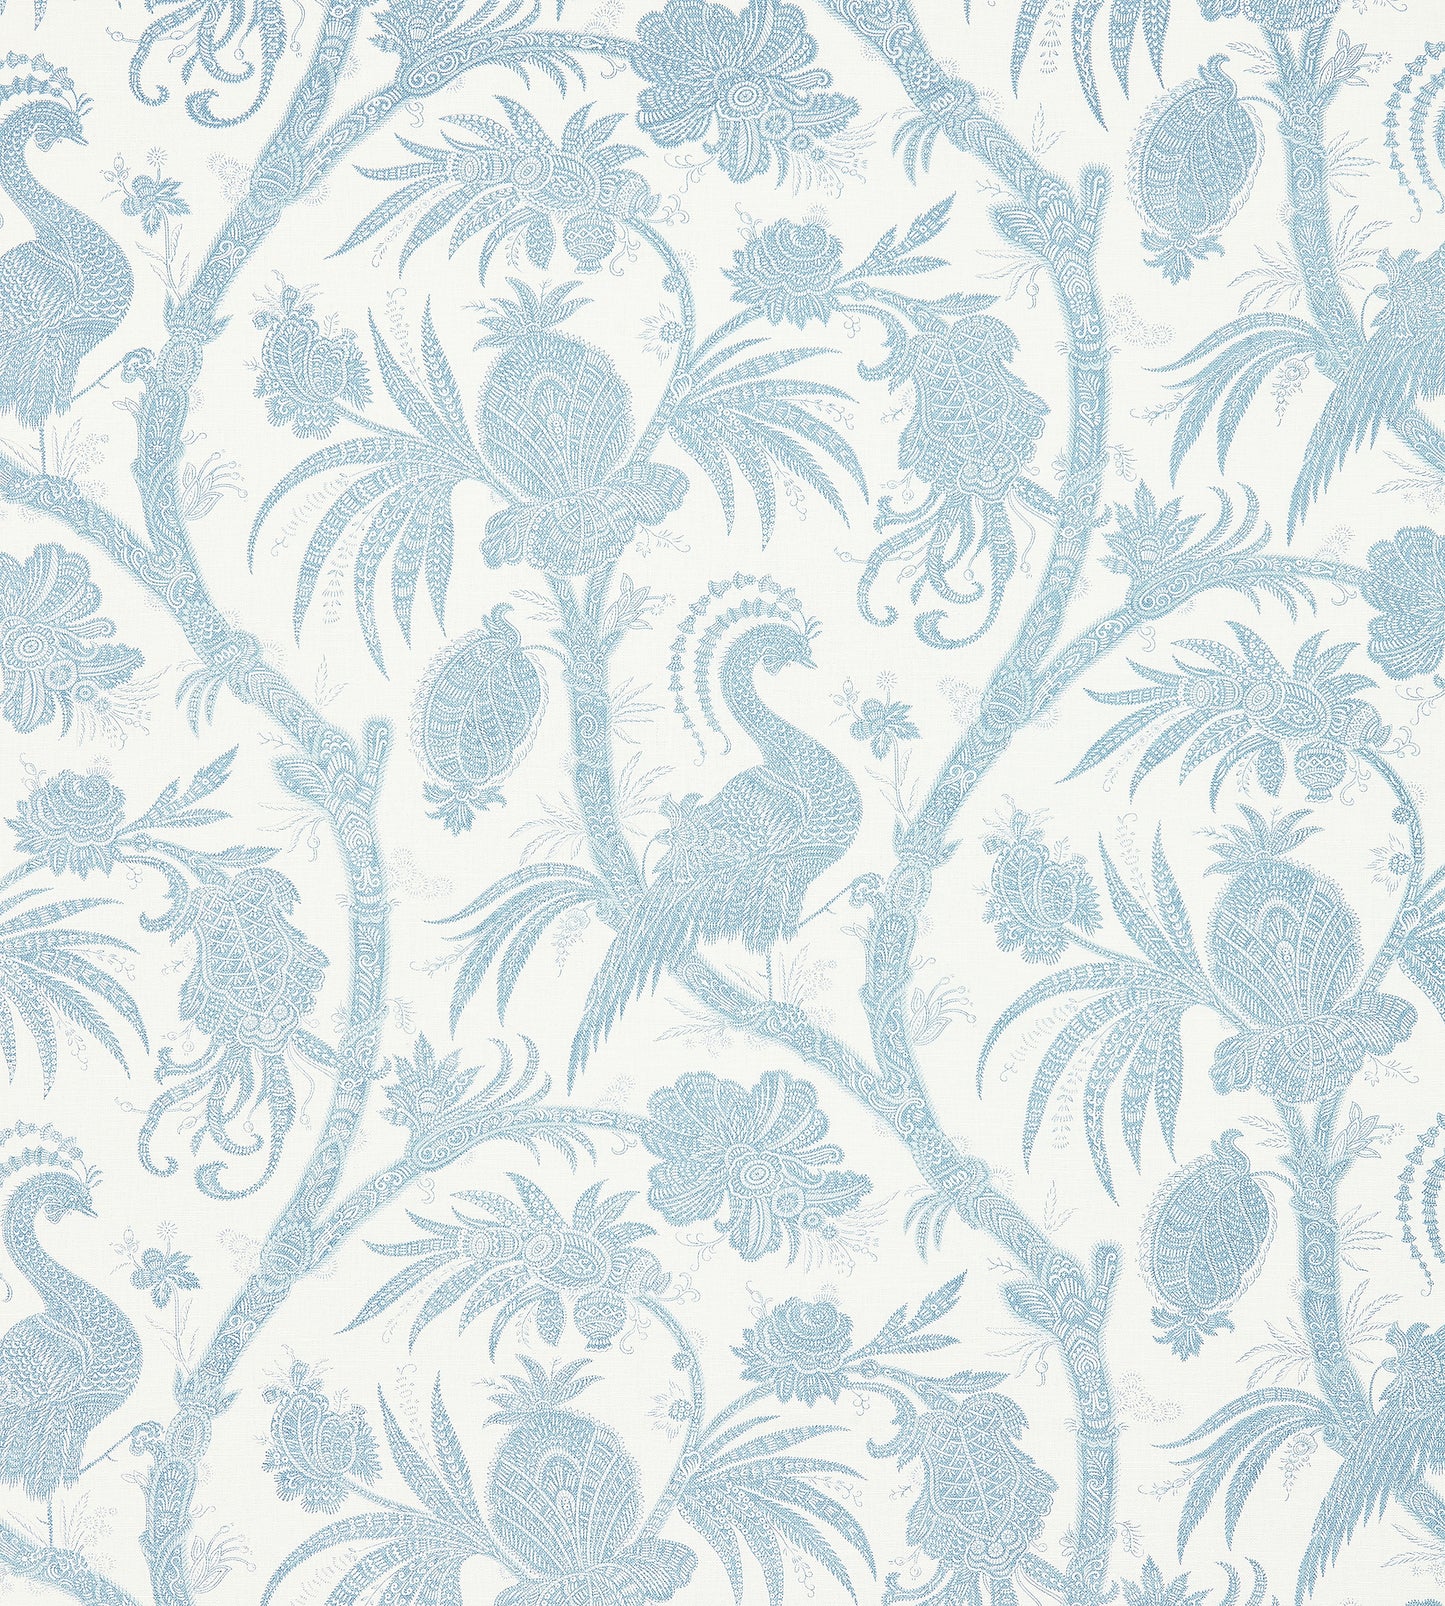 Purchase Scalamandre Fabric Product SC 000116575, Balinese Peacock Linen Print Sky 1